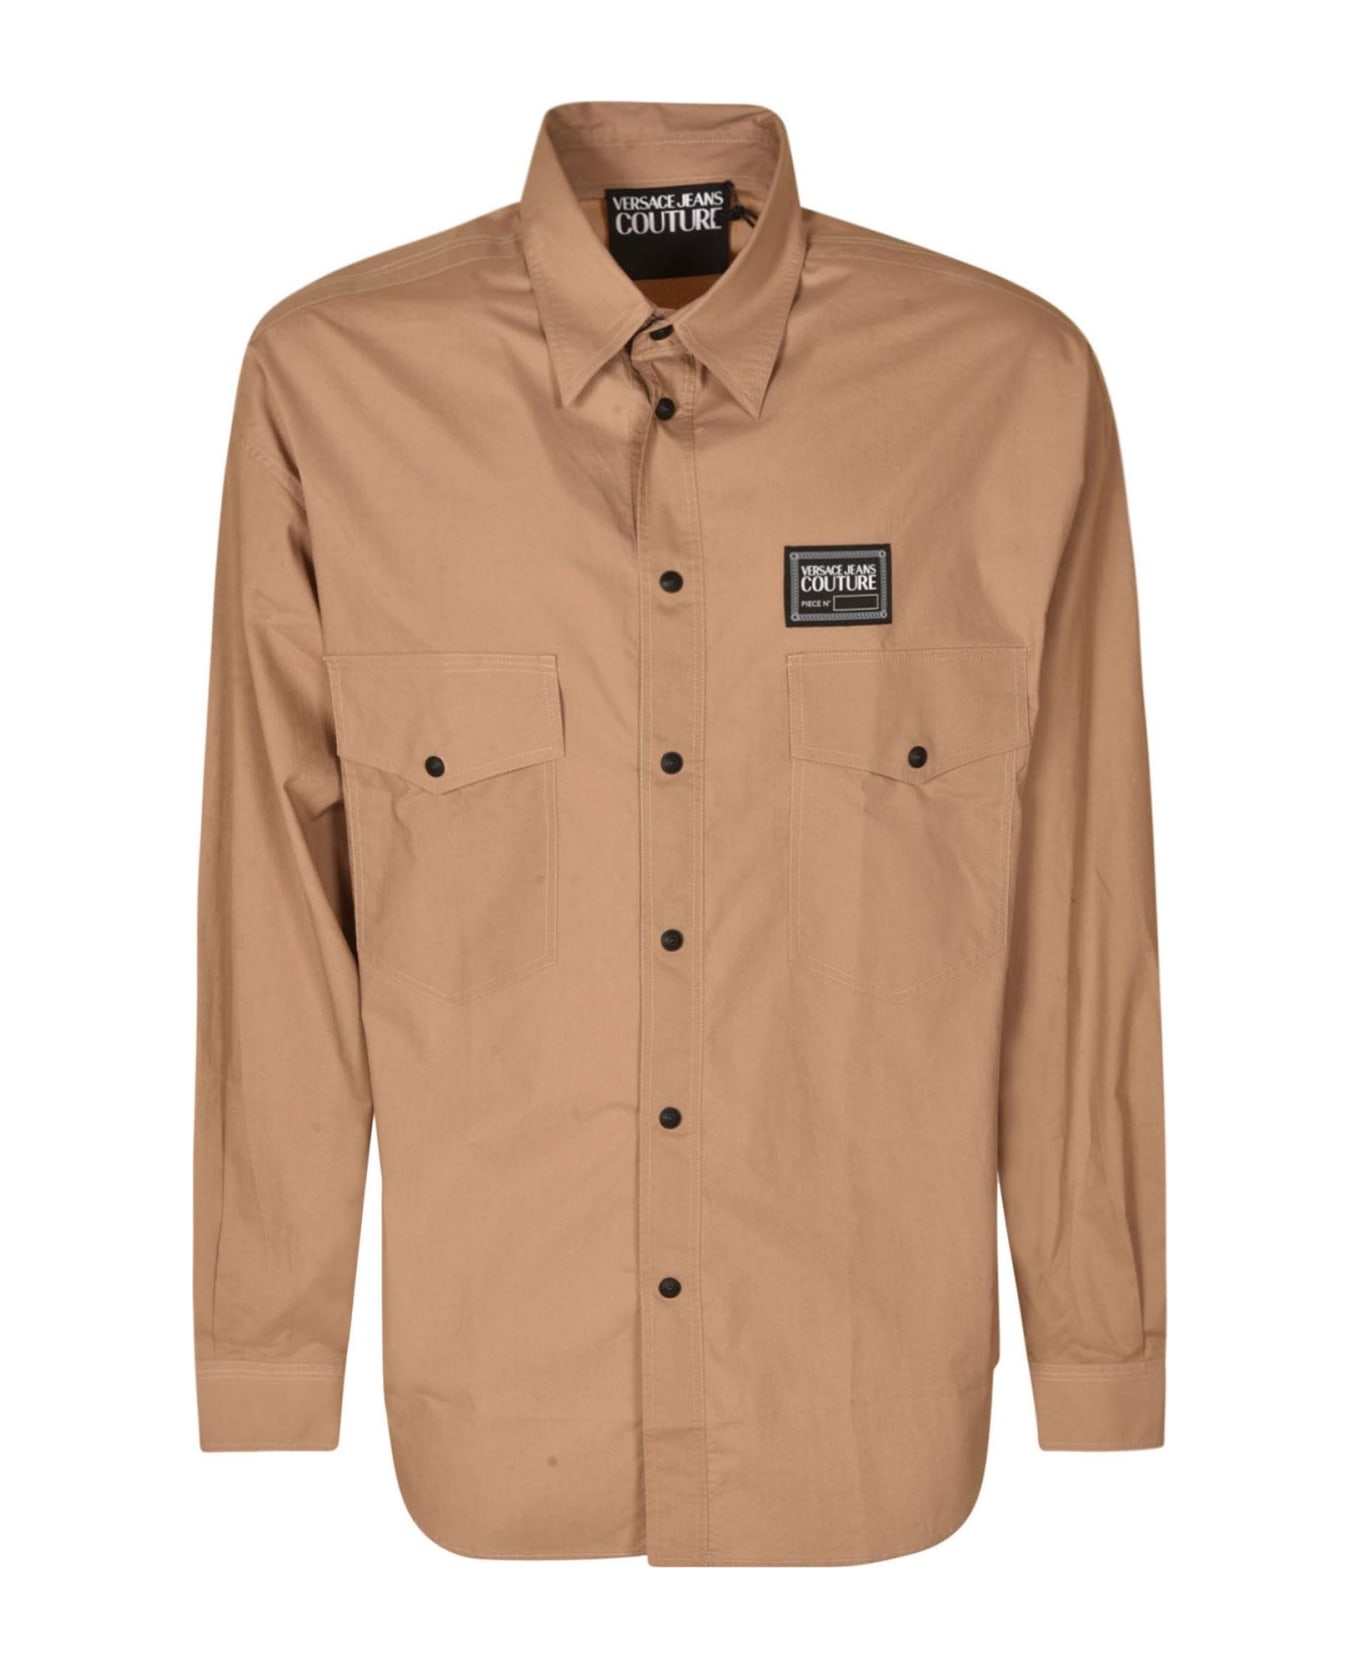 Versace Jeans Couture Shirt - TAN シャツ